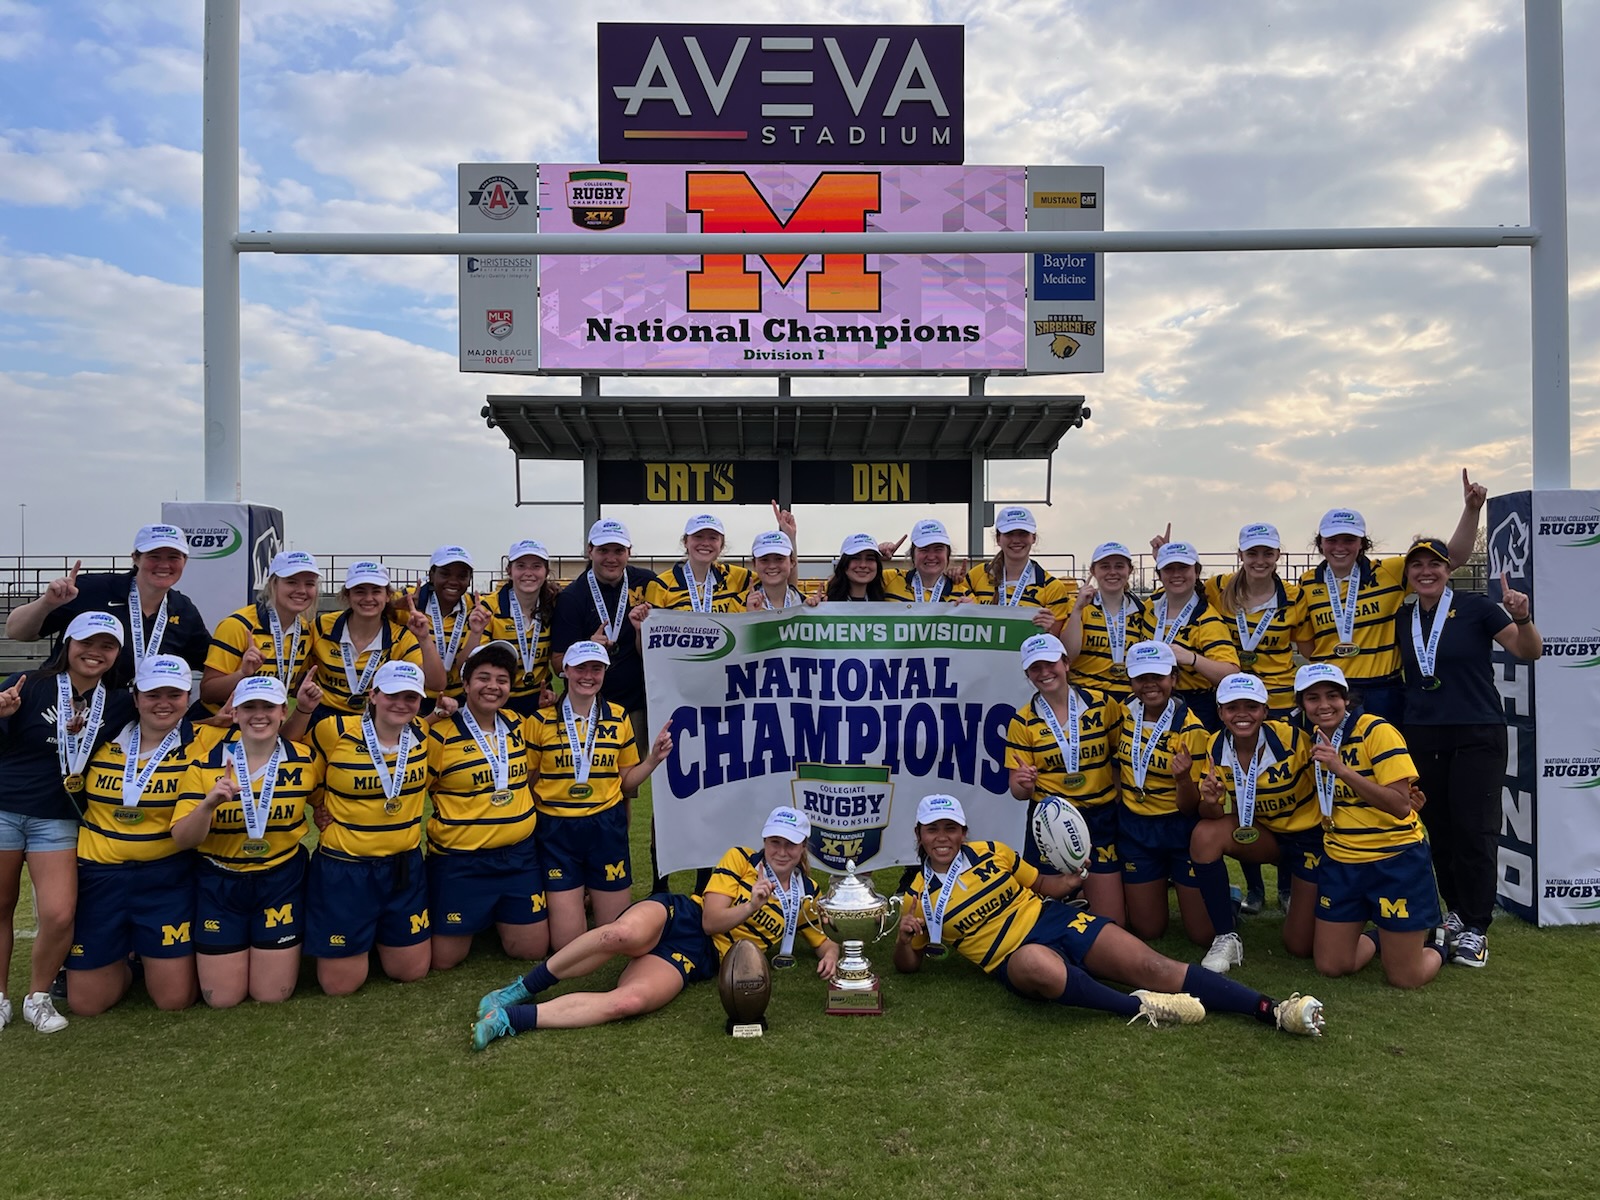 Women's rugby battles Michigan for National Championship, on Sunday - Notre  Dame College Athletics